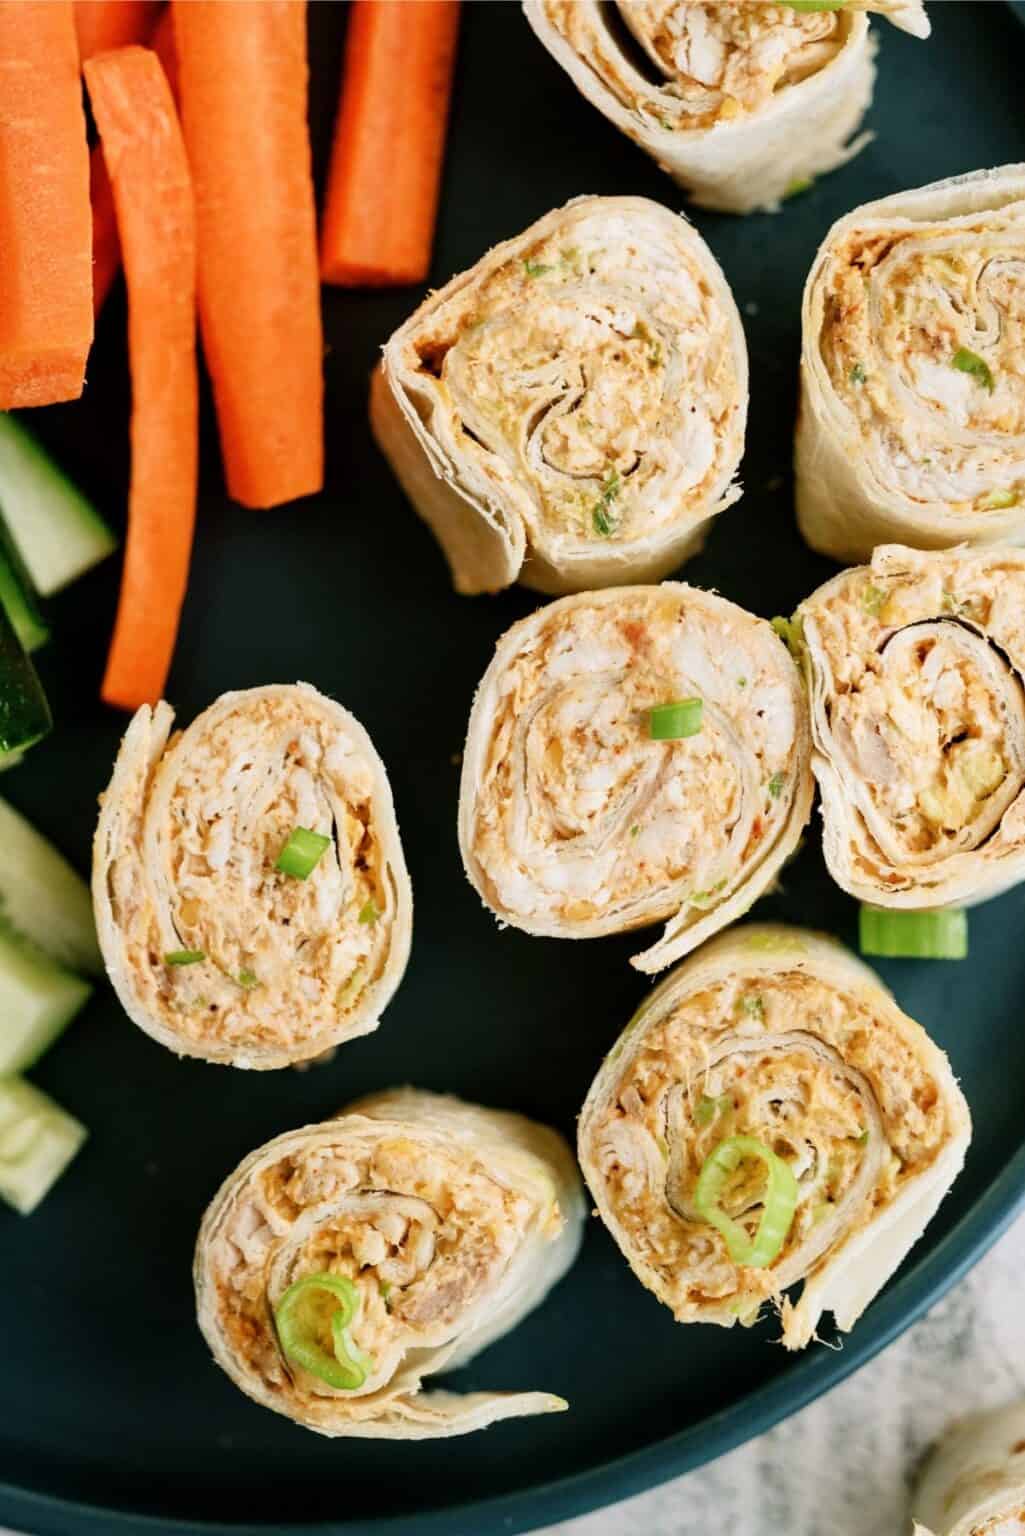 The Best Appetizers - Recipes To Wow Your Crowd